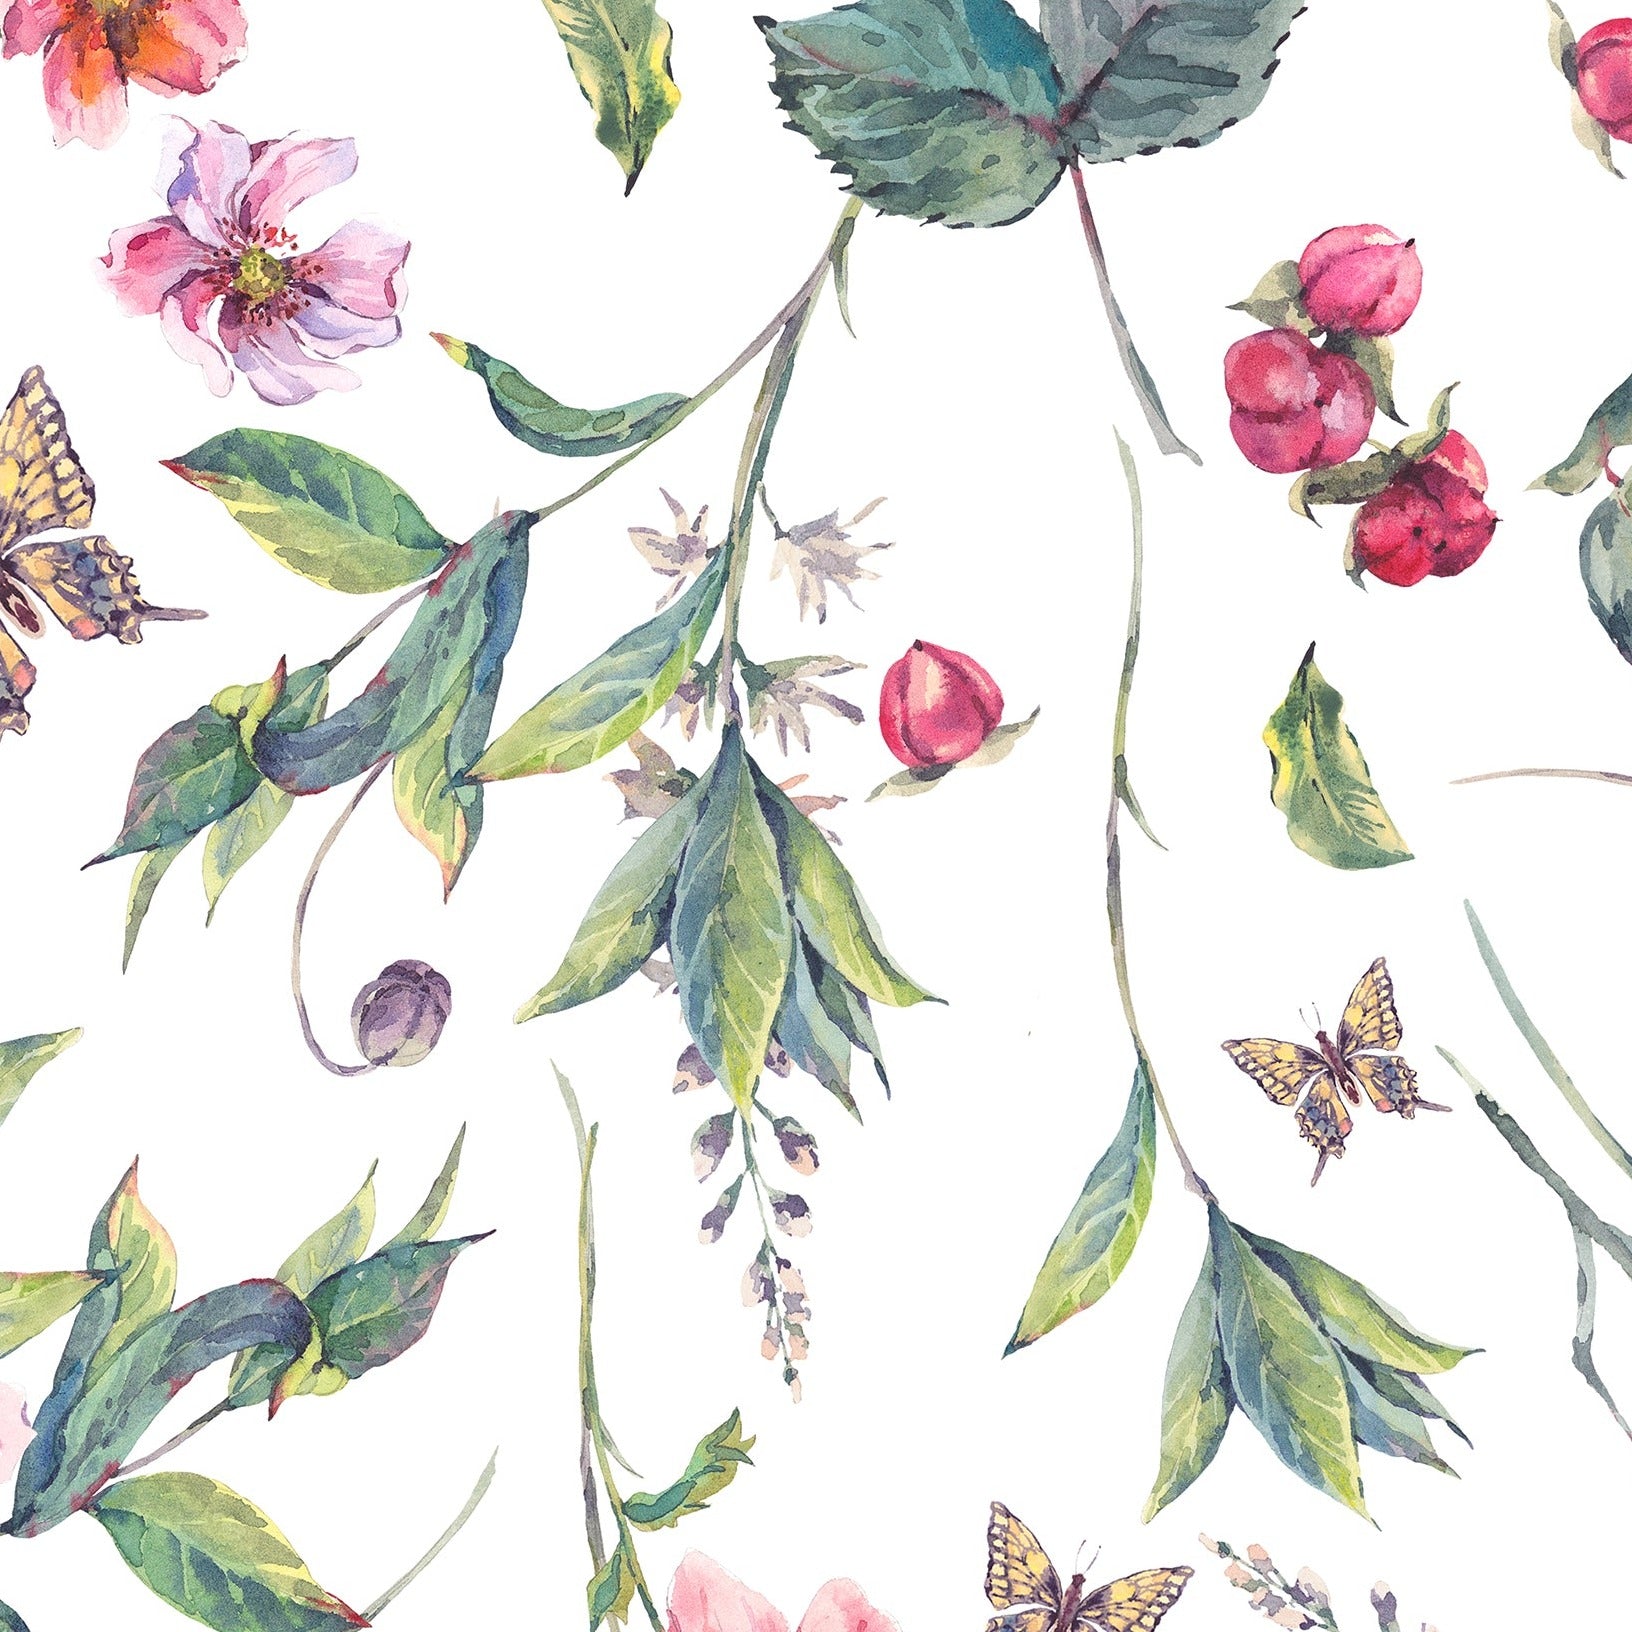 Close-up view of Graceful Garden Wallpaper showcasing detailed watercolor flowers in shades of pink and red, with green foliage and small butterflies, giving a vibrant, natural feel to the space.